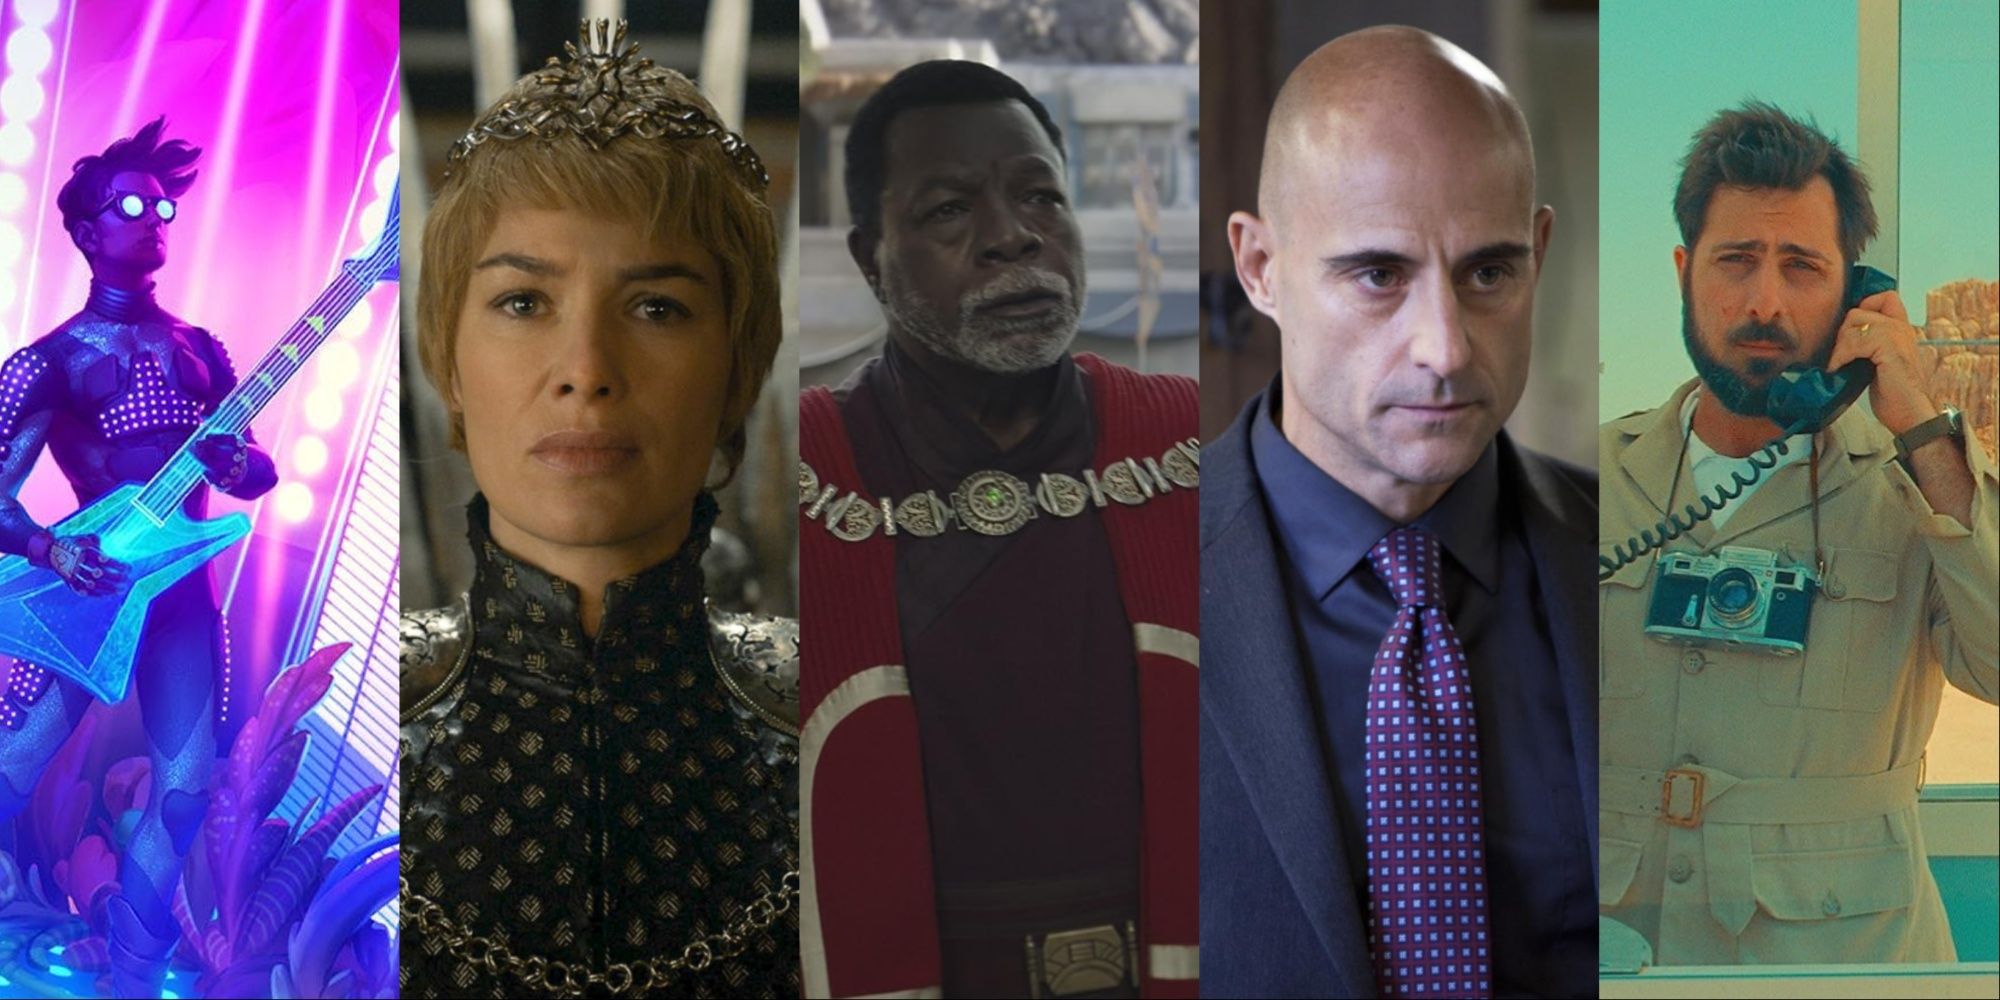 Five-image collage of the main character on the cover art of The Artful Escape, Lena Headey as Cersei in Game of Thrones, Carl Weathers in The Mandalorian, Mark Strong, and Jason Shwartzman in Asteroid City.